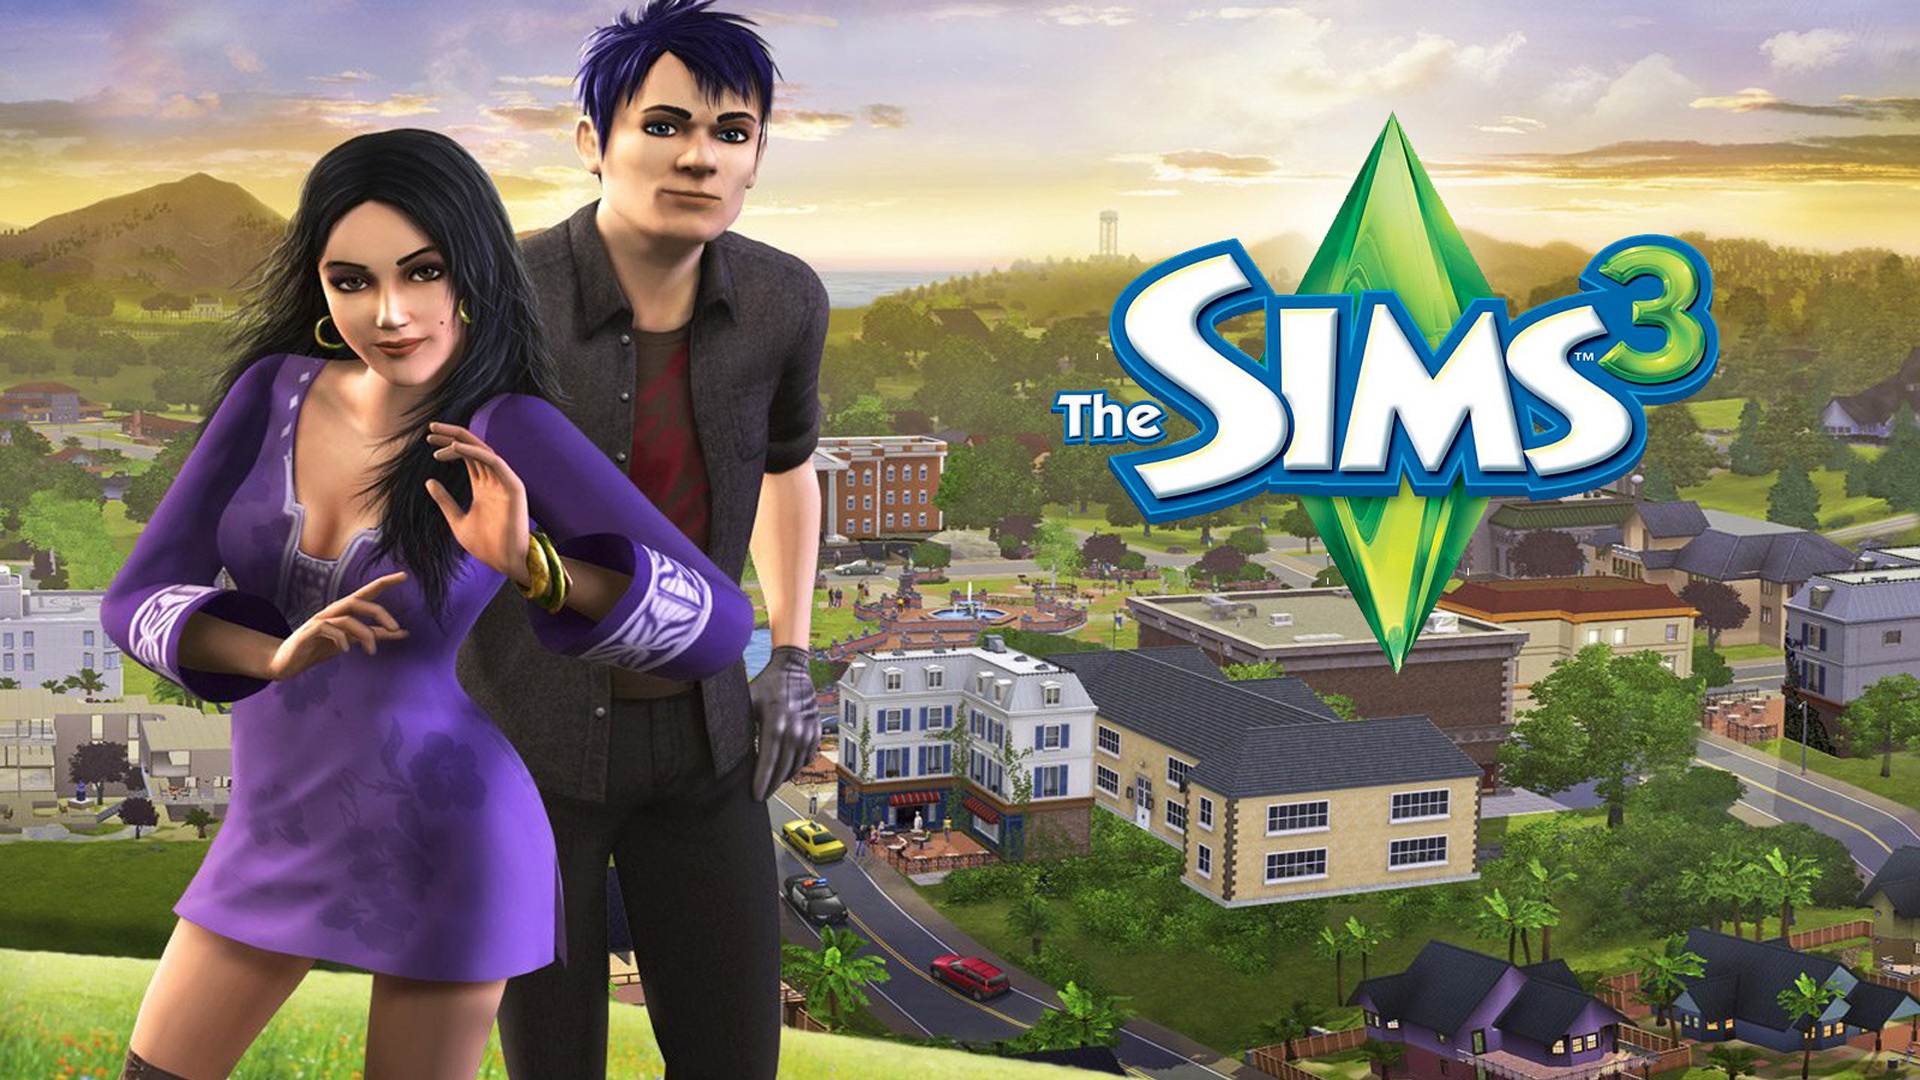 The Sims 3 Free Game